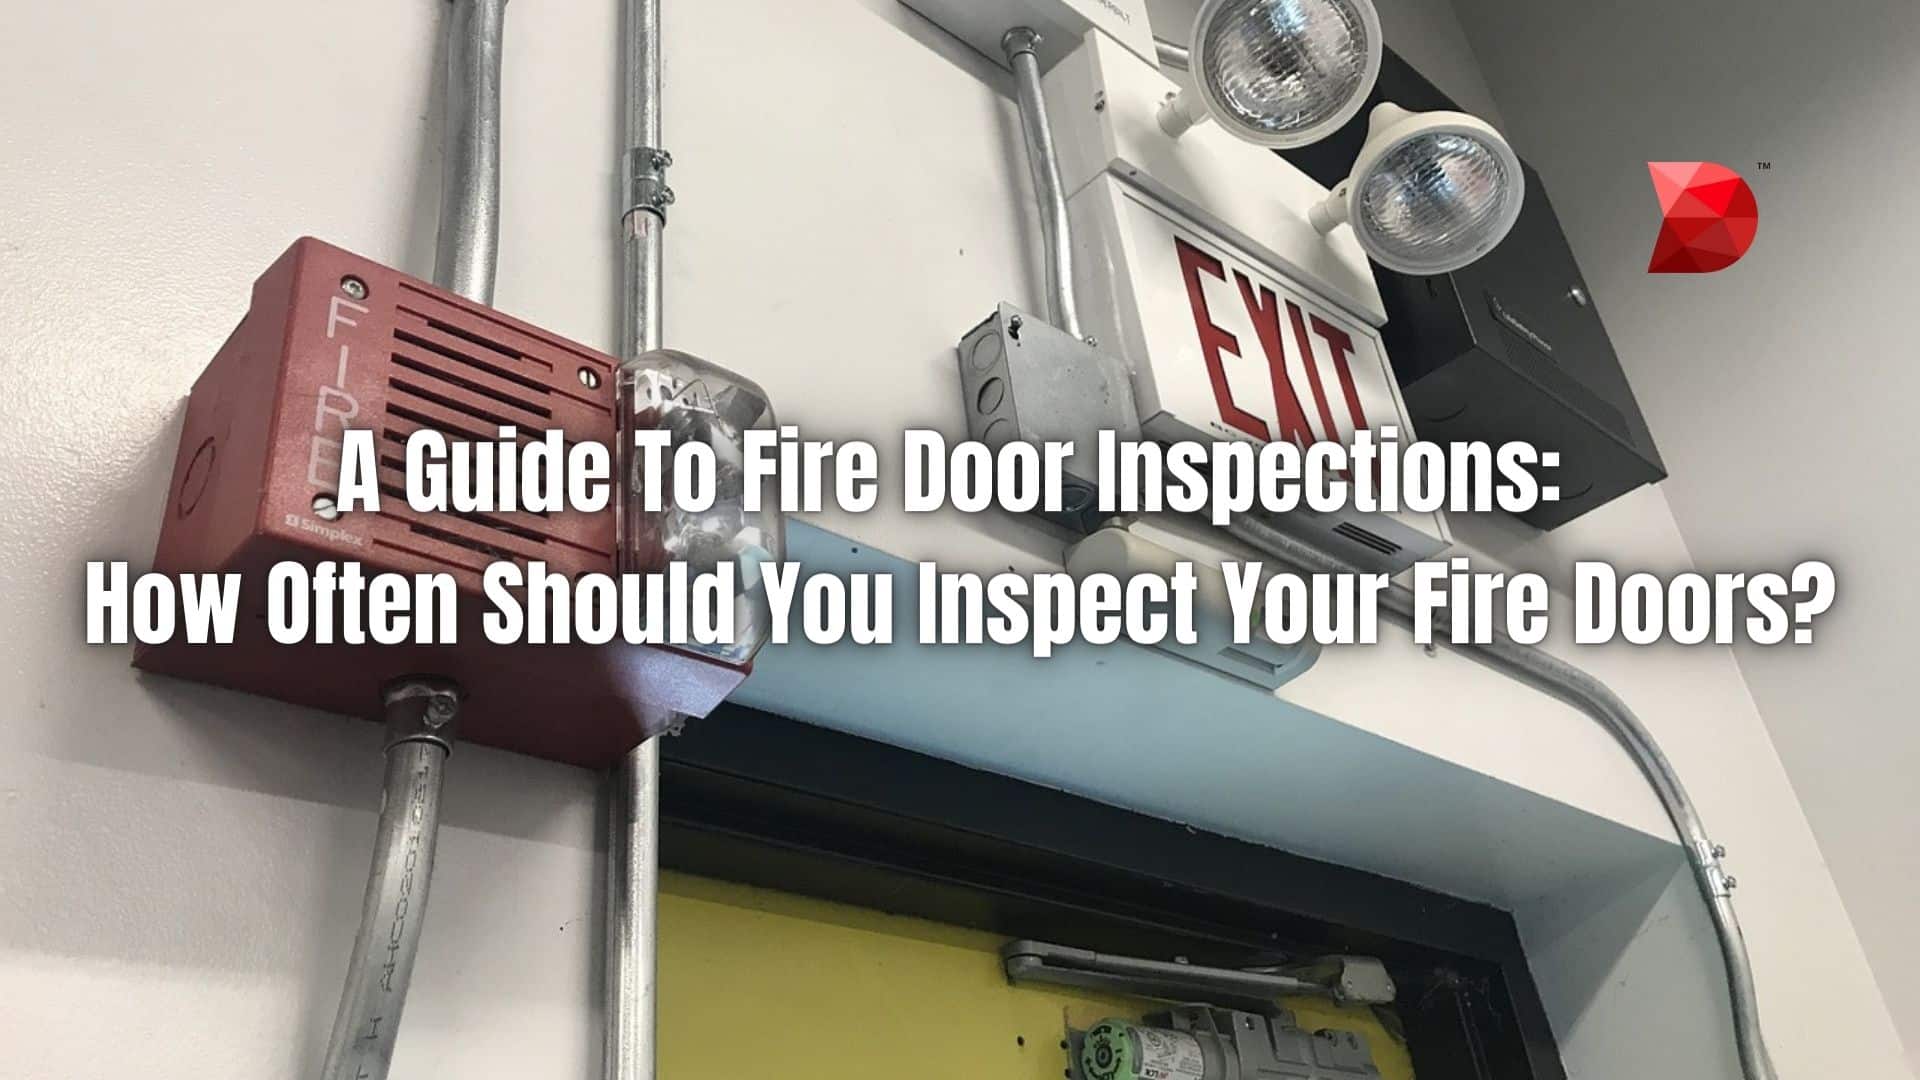 A Guide To Fire Door Inspections How Often Should You Inspect Your Fire Doors